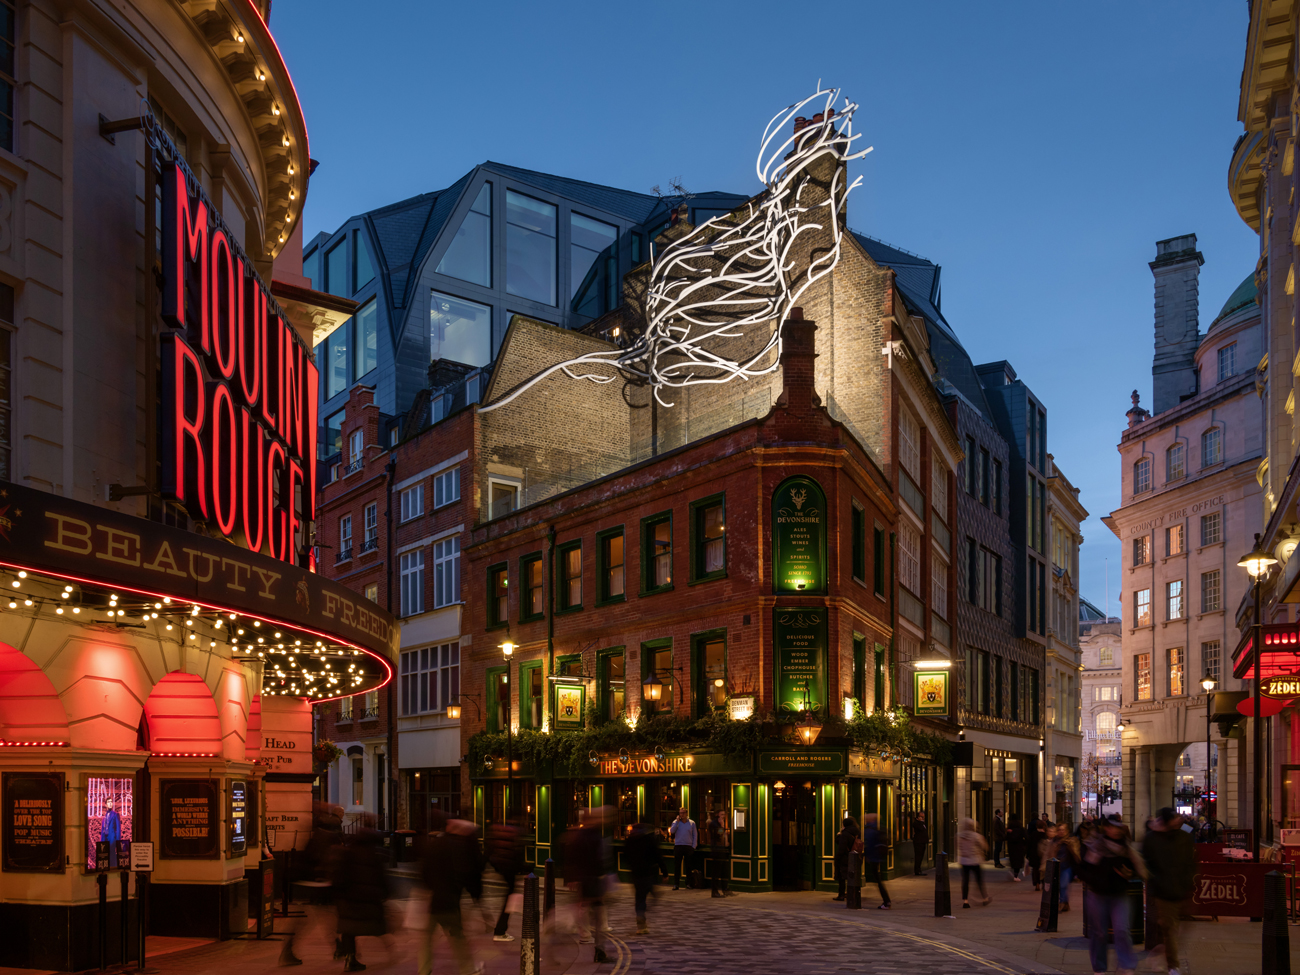 Acrylicize Unveils "London is a Forest," a Giant Installation in London's Soho